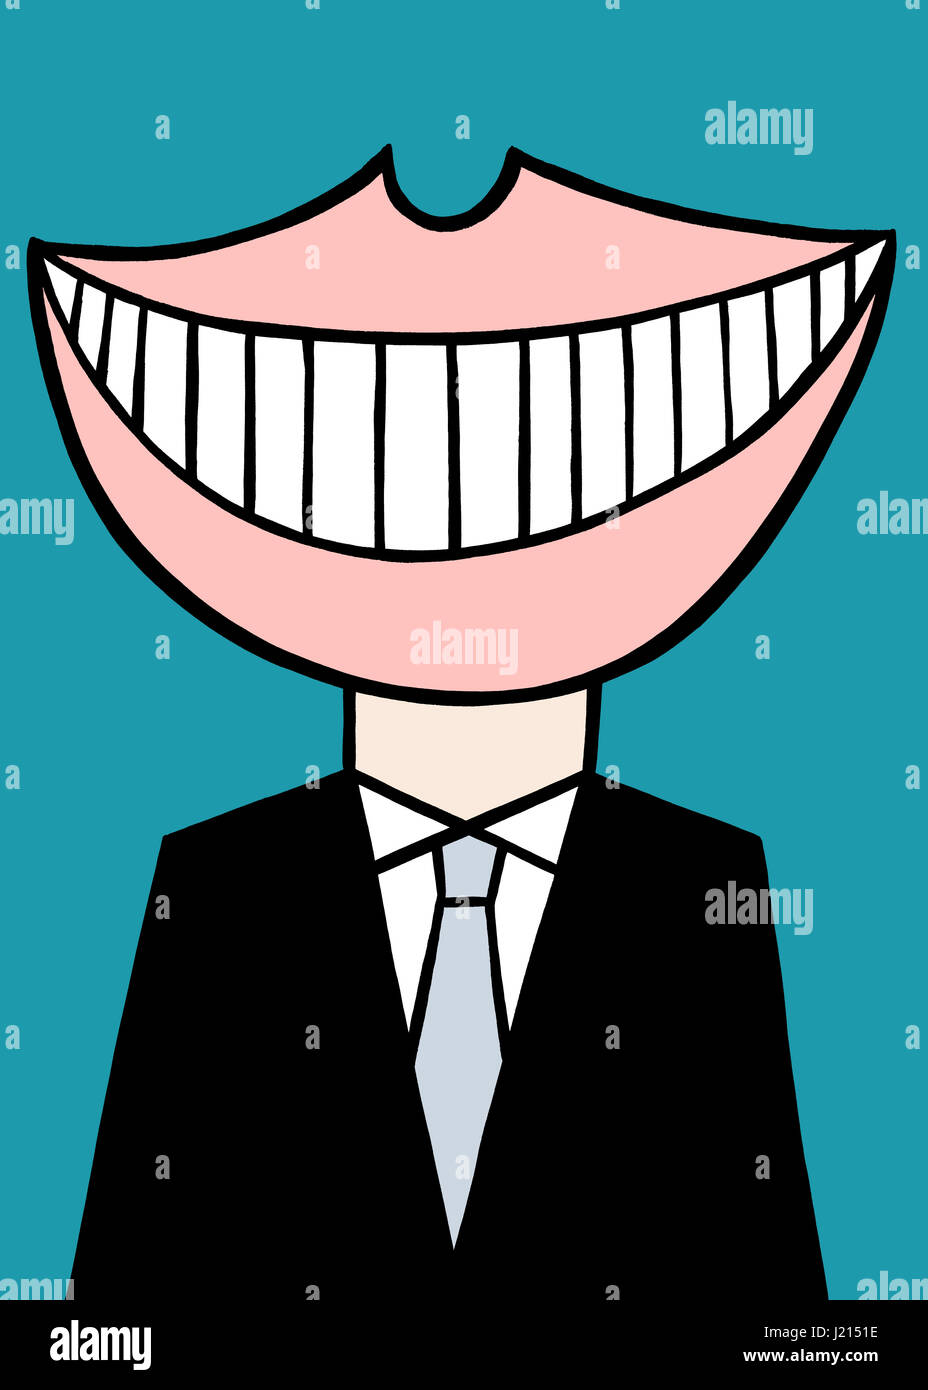 Smile. A business illustration about thinking different thoughts. Stock Photo